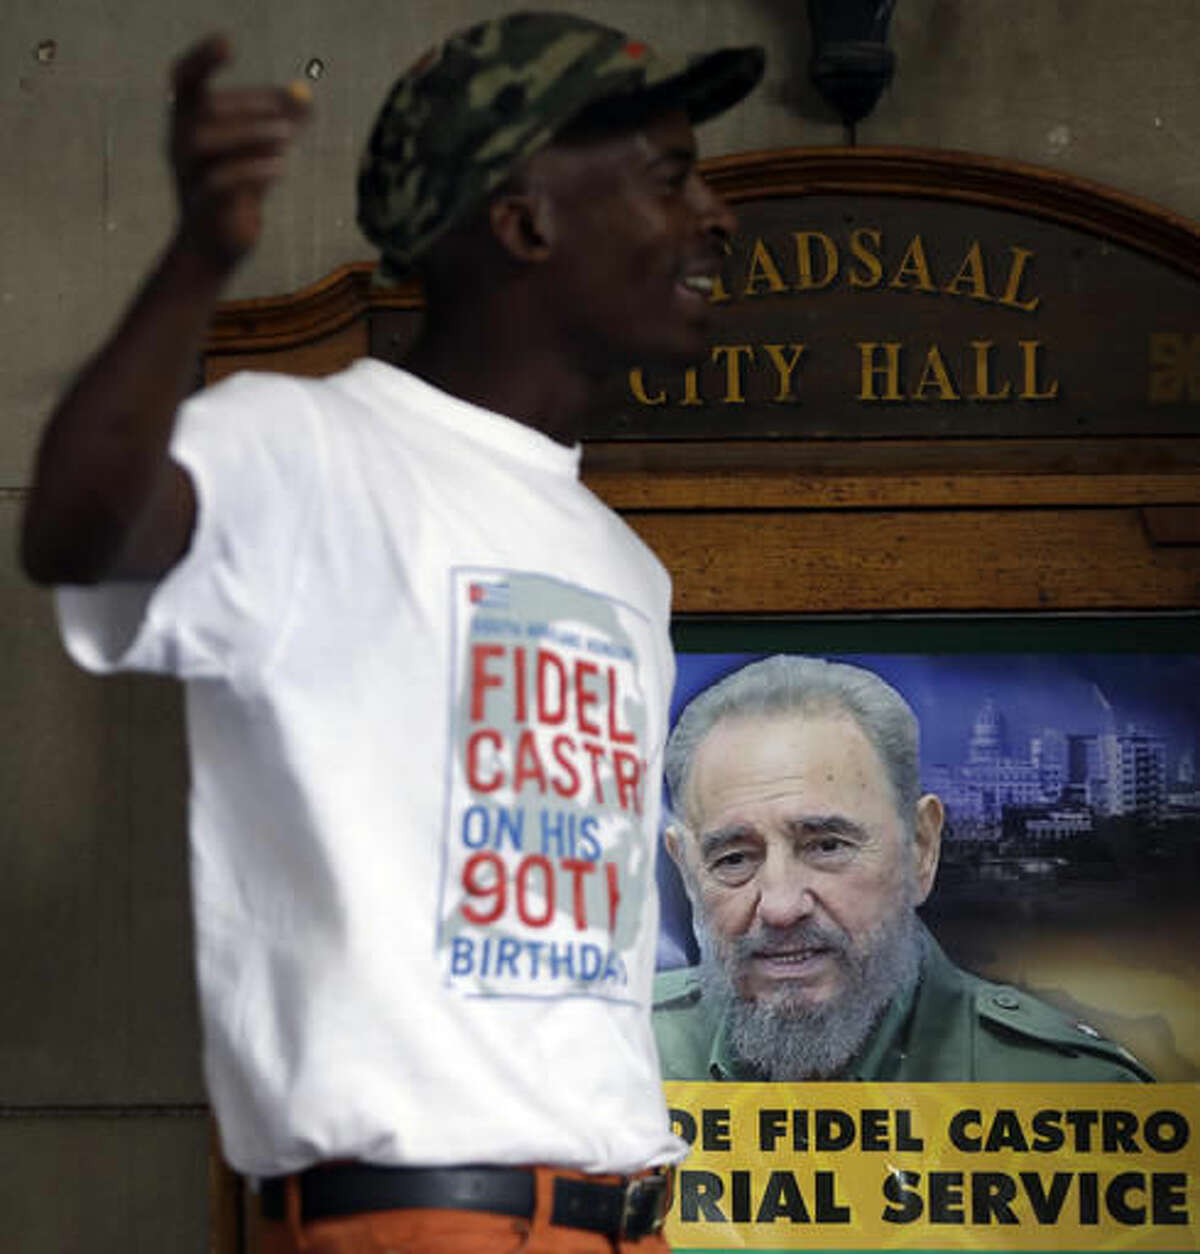 A man stands outside the venue hosting the memorial service for the late Cuban revolutionary leader Fidel Castro in Johannesburg, South AfricaWednesday, Nov. 30, 2016. Castro, who led a rebel army to improbable victory, embraced Soviet-style communism and defied the power of 10 U.S. presidents during his half century rule of Cuba, died Friday at age 90. (AP Photo/Themba Hadebe)